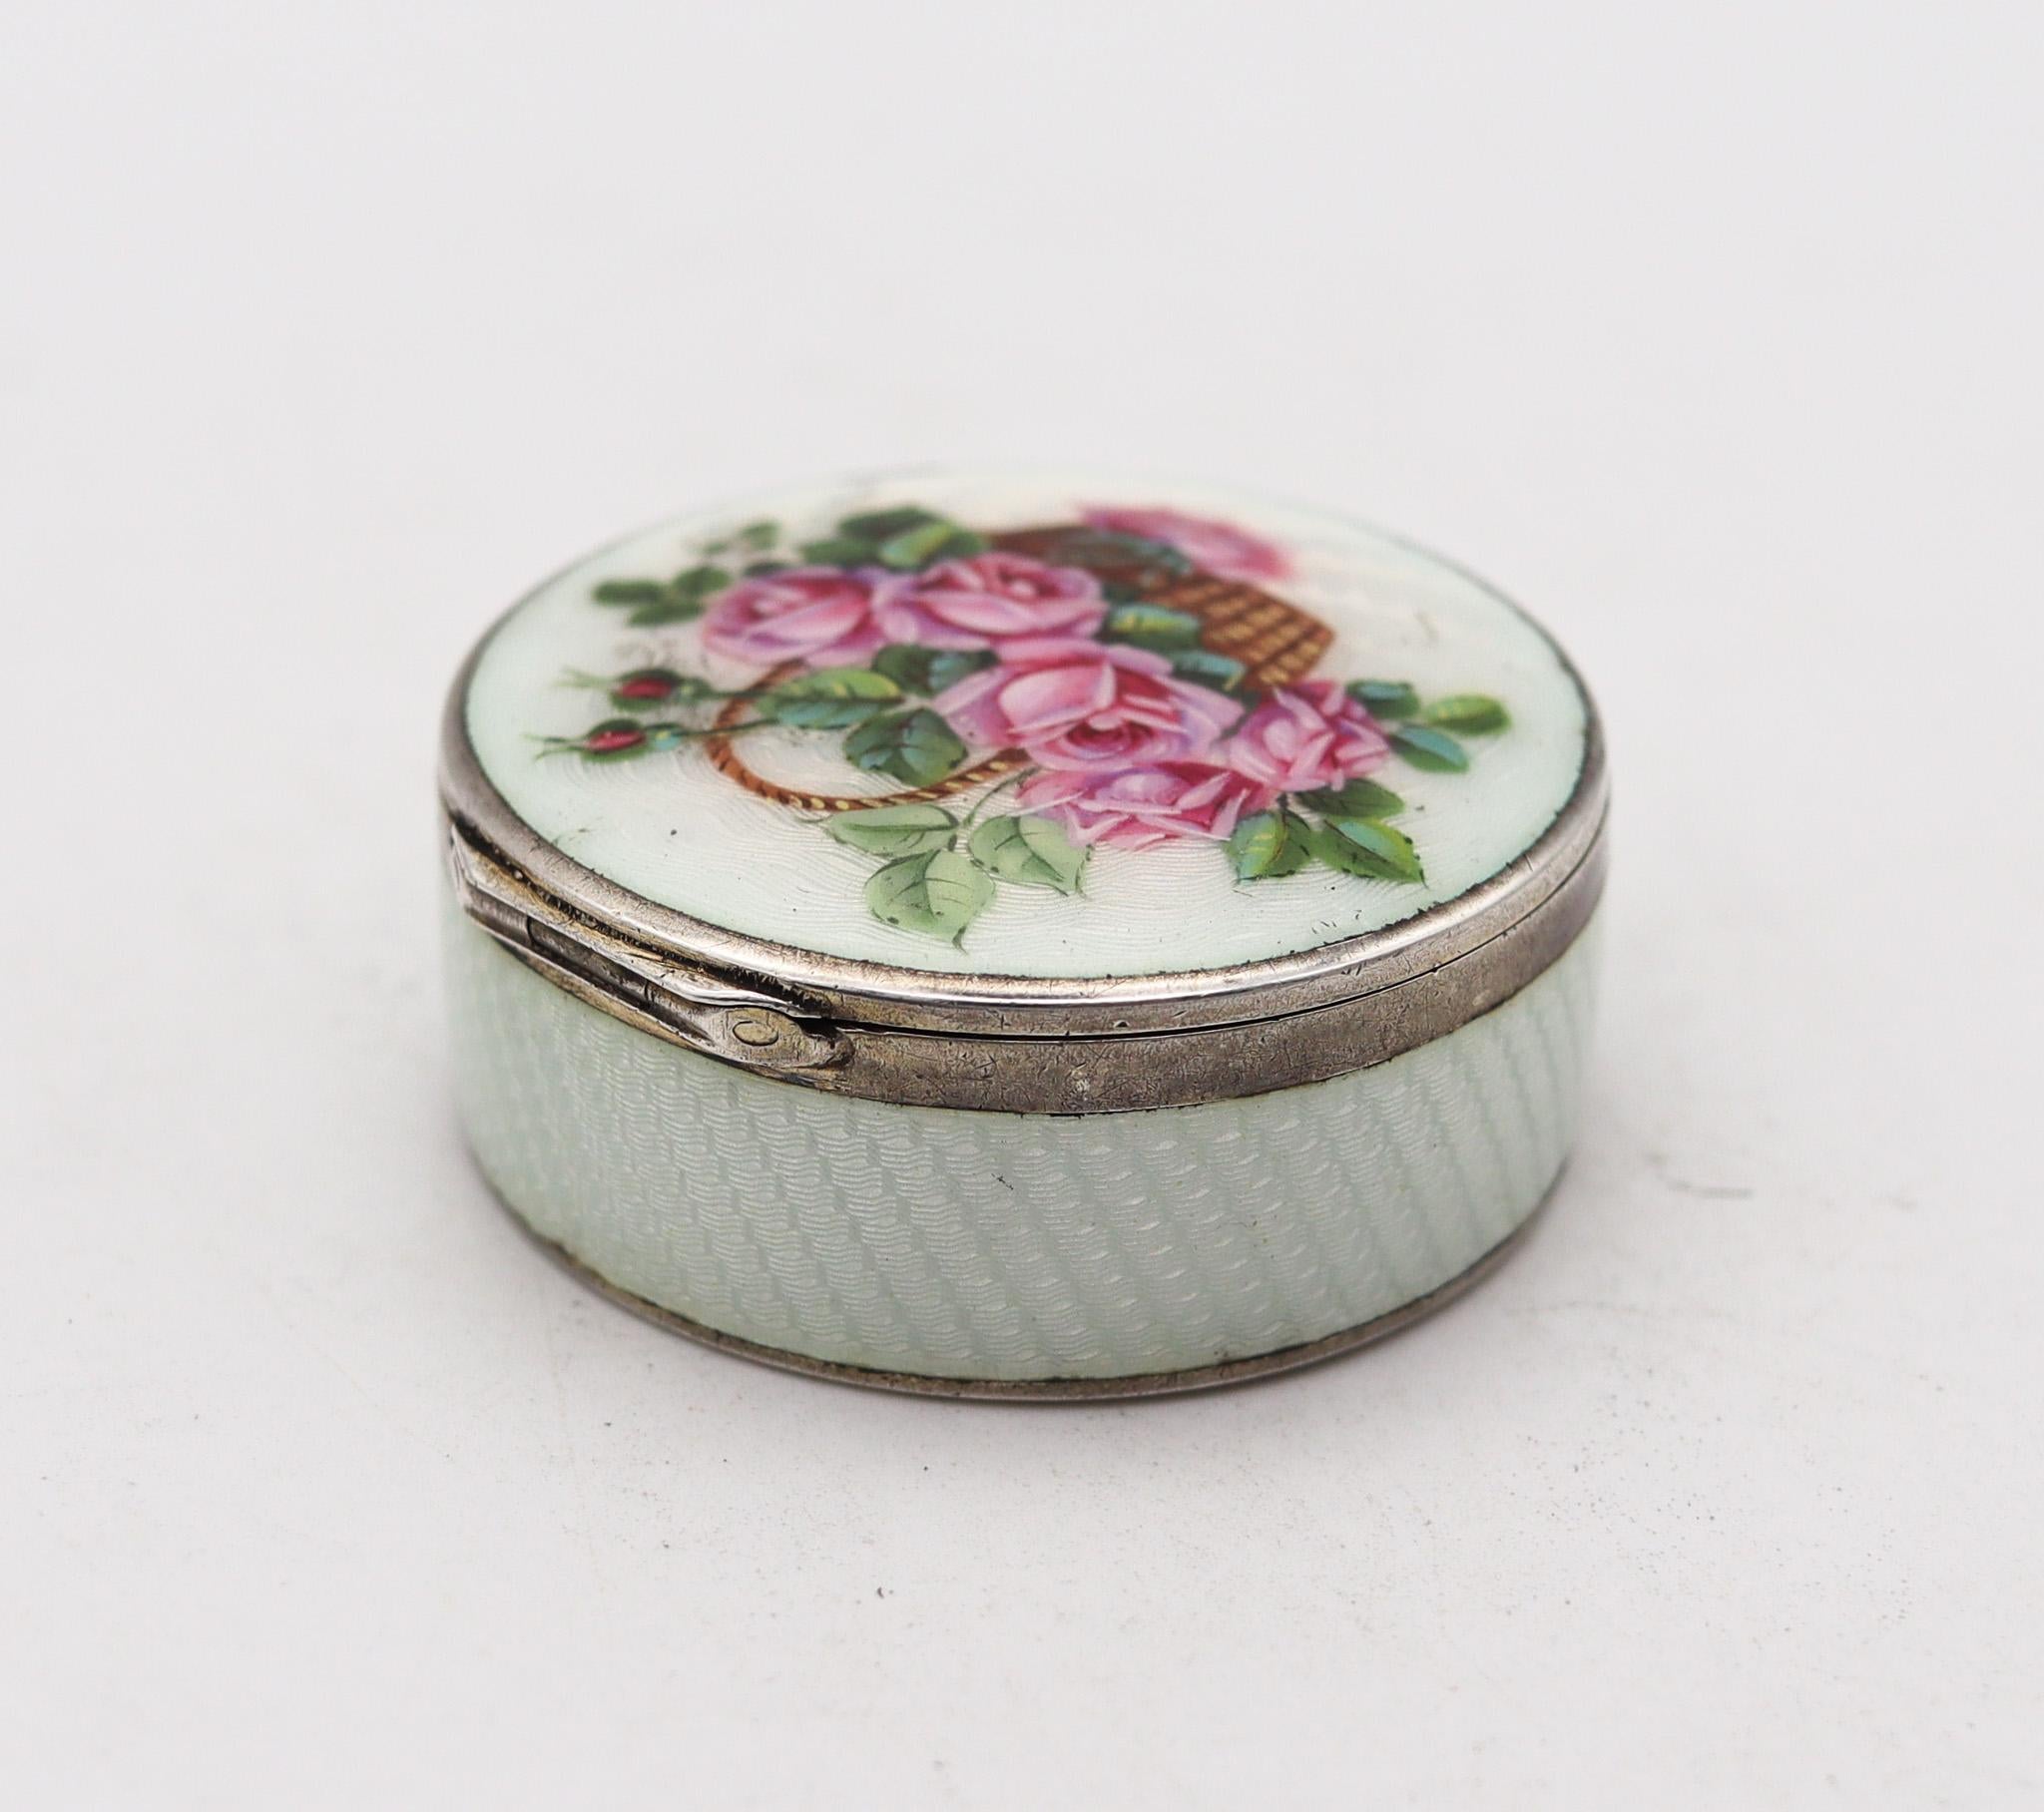 German Pforzheim 1910 Art Nouveau Guilloche Enamel Box 935 Sterling With Flowers In Excellent Condition For Sale In Miami, FL